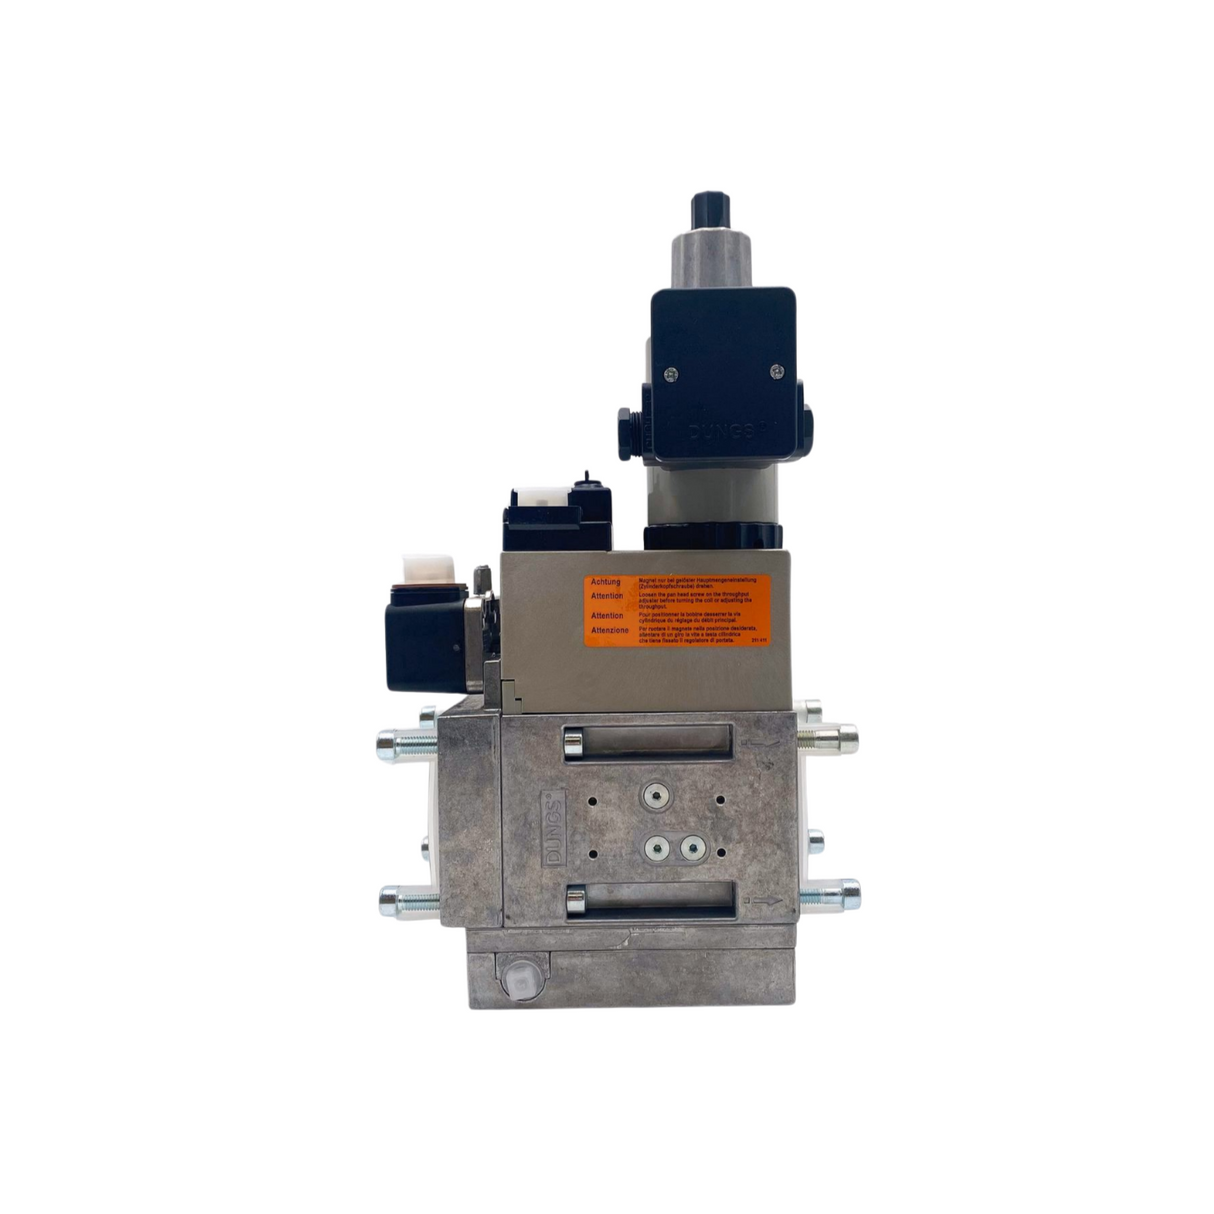 Dungs MB-ZRDLE 420 B01 S50 + GW150 A5 Multibloc Gas Valve - 230v